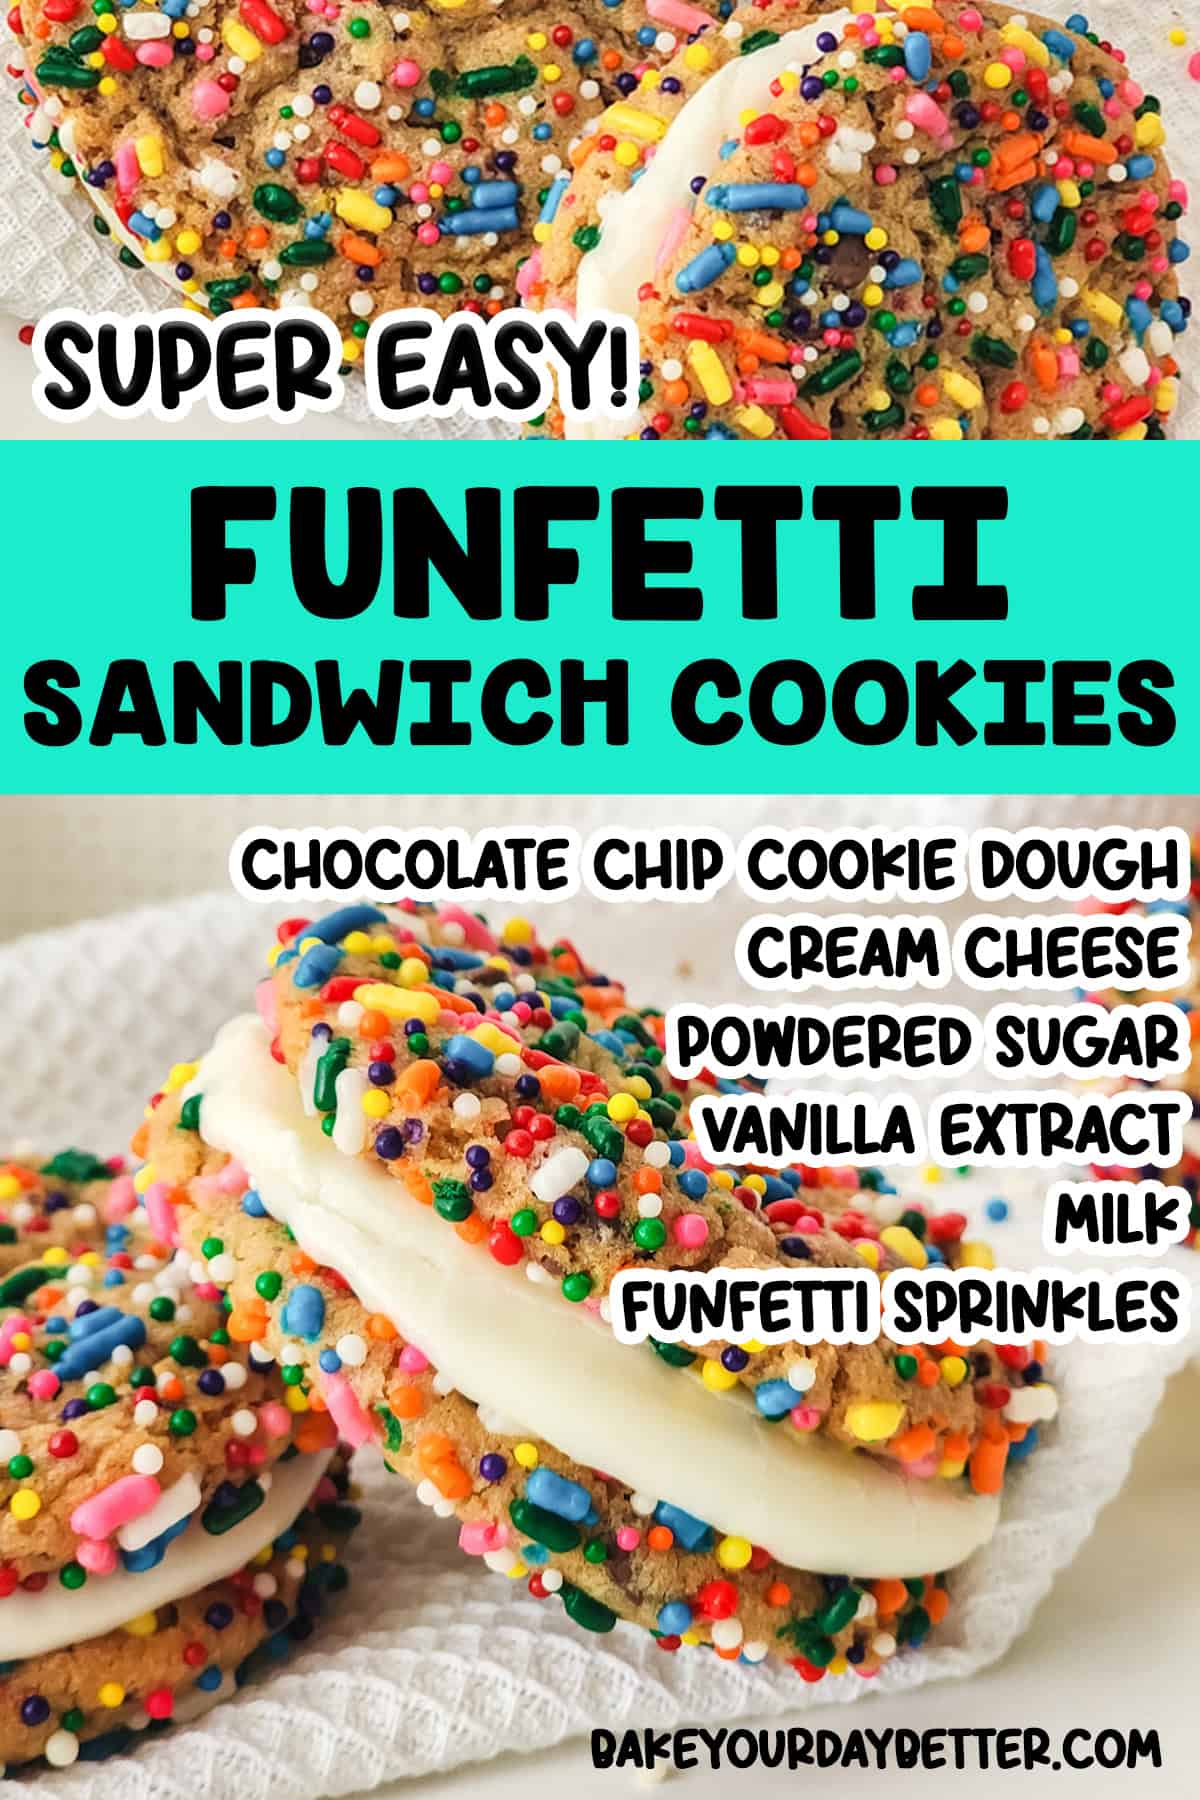 pictures of funfetti sandwich cookies with text overlay that says: super easy funfetti sandwich cookies and a list of ingredients